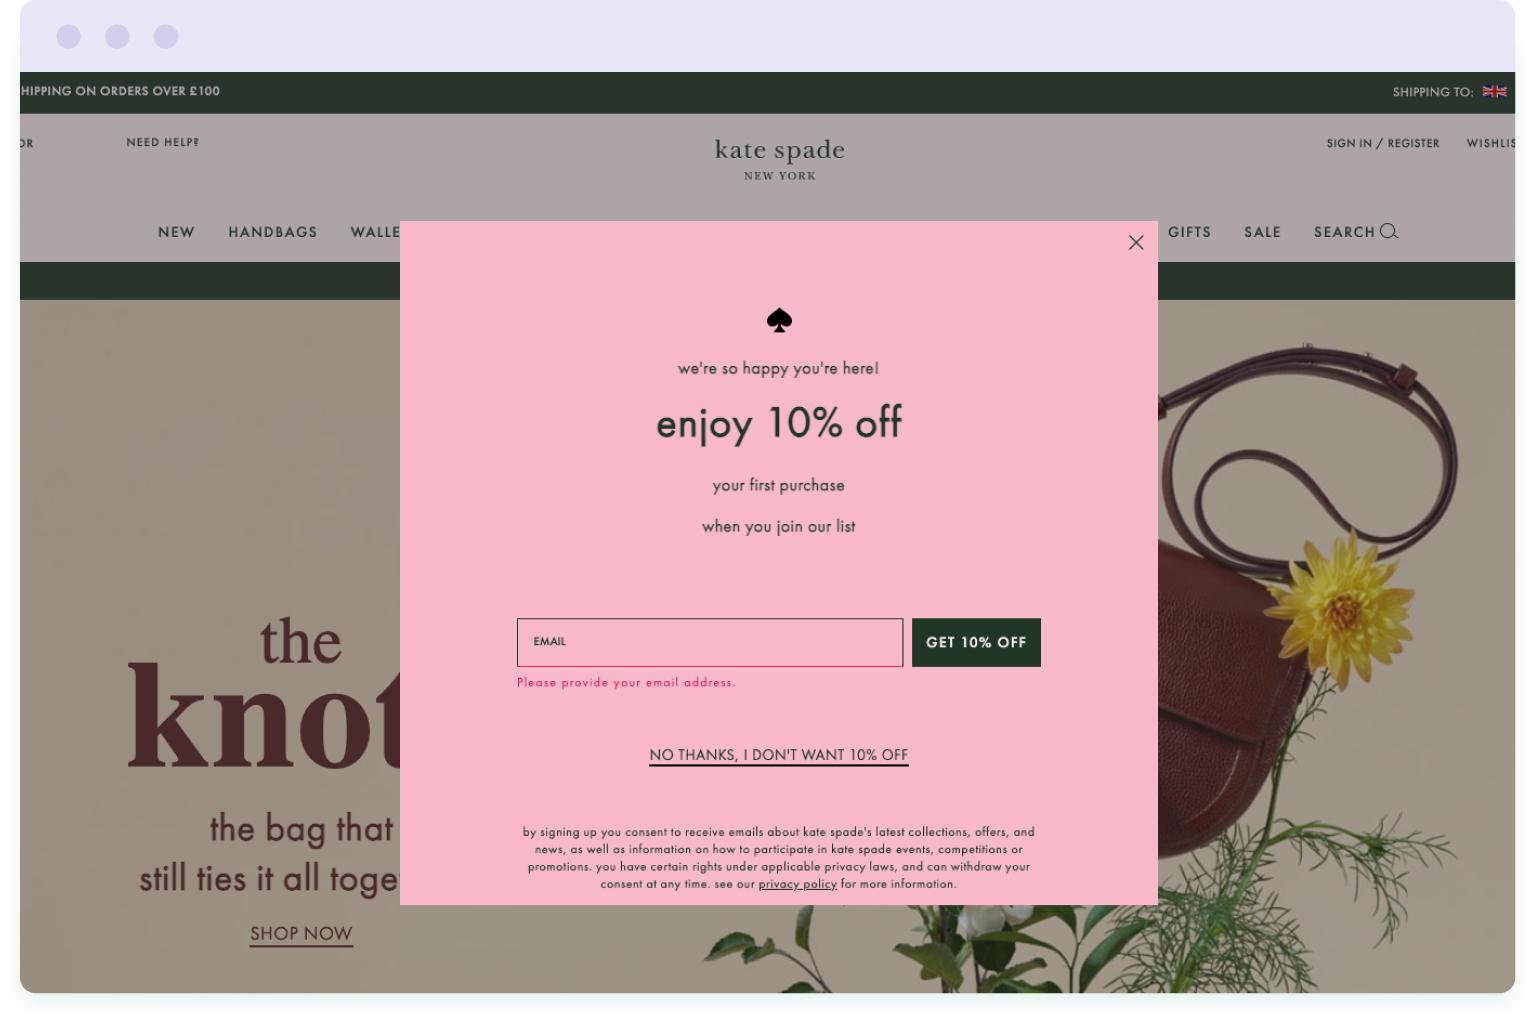 Example of a pop-up form used to grow the email list of retailer Kate Spade